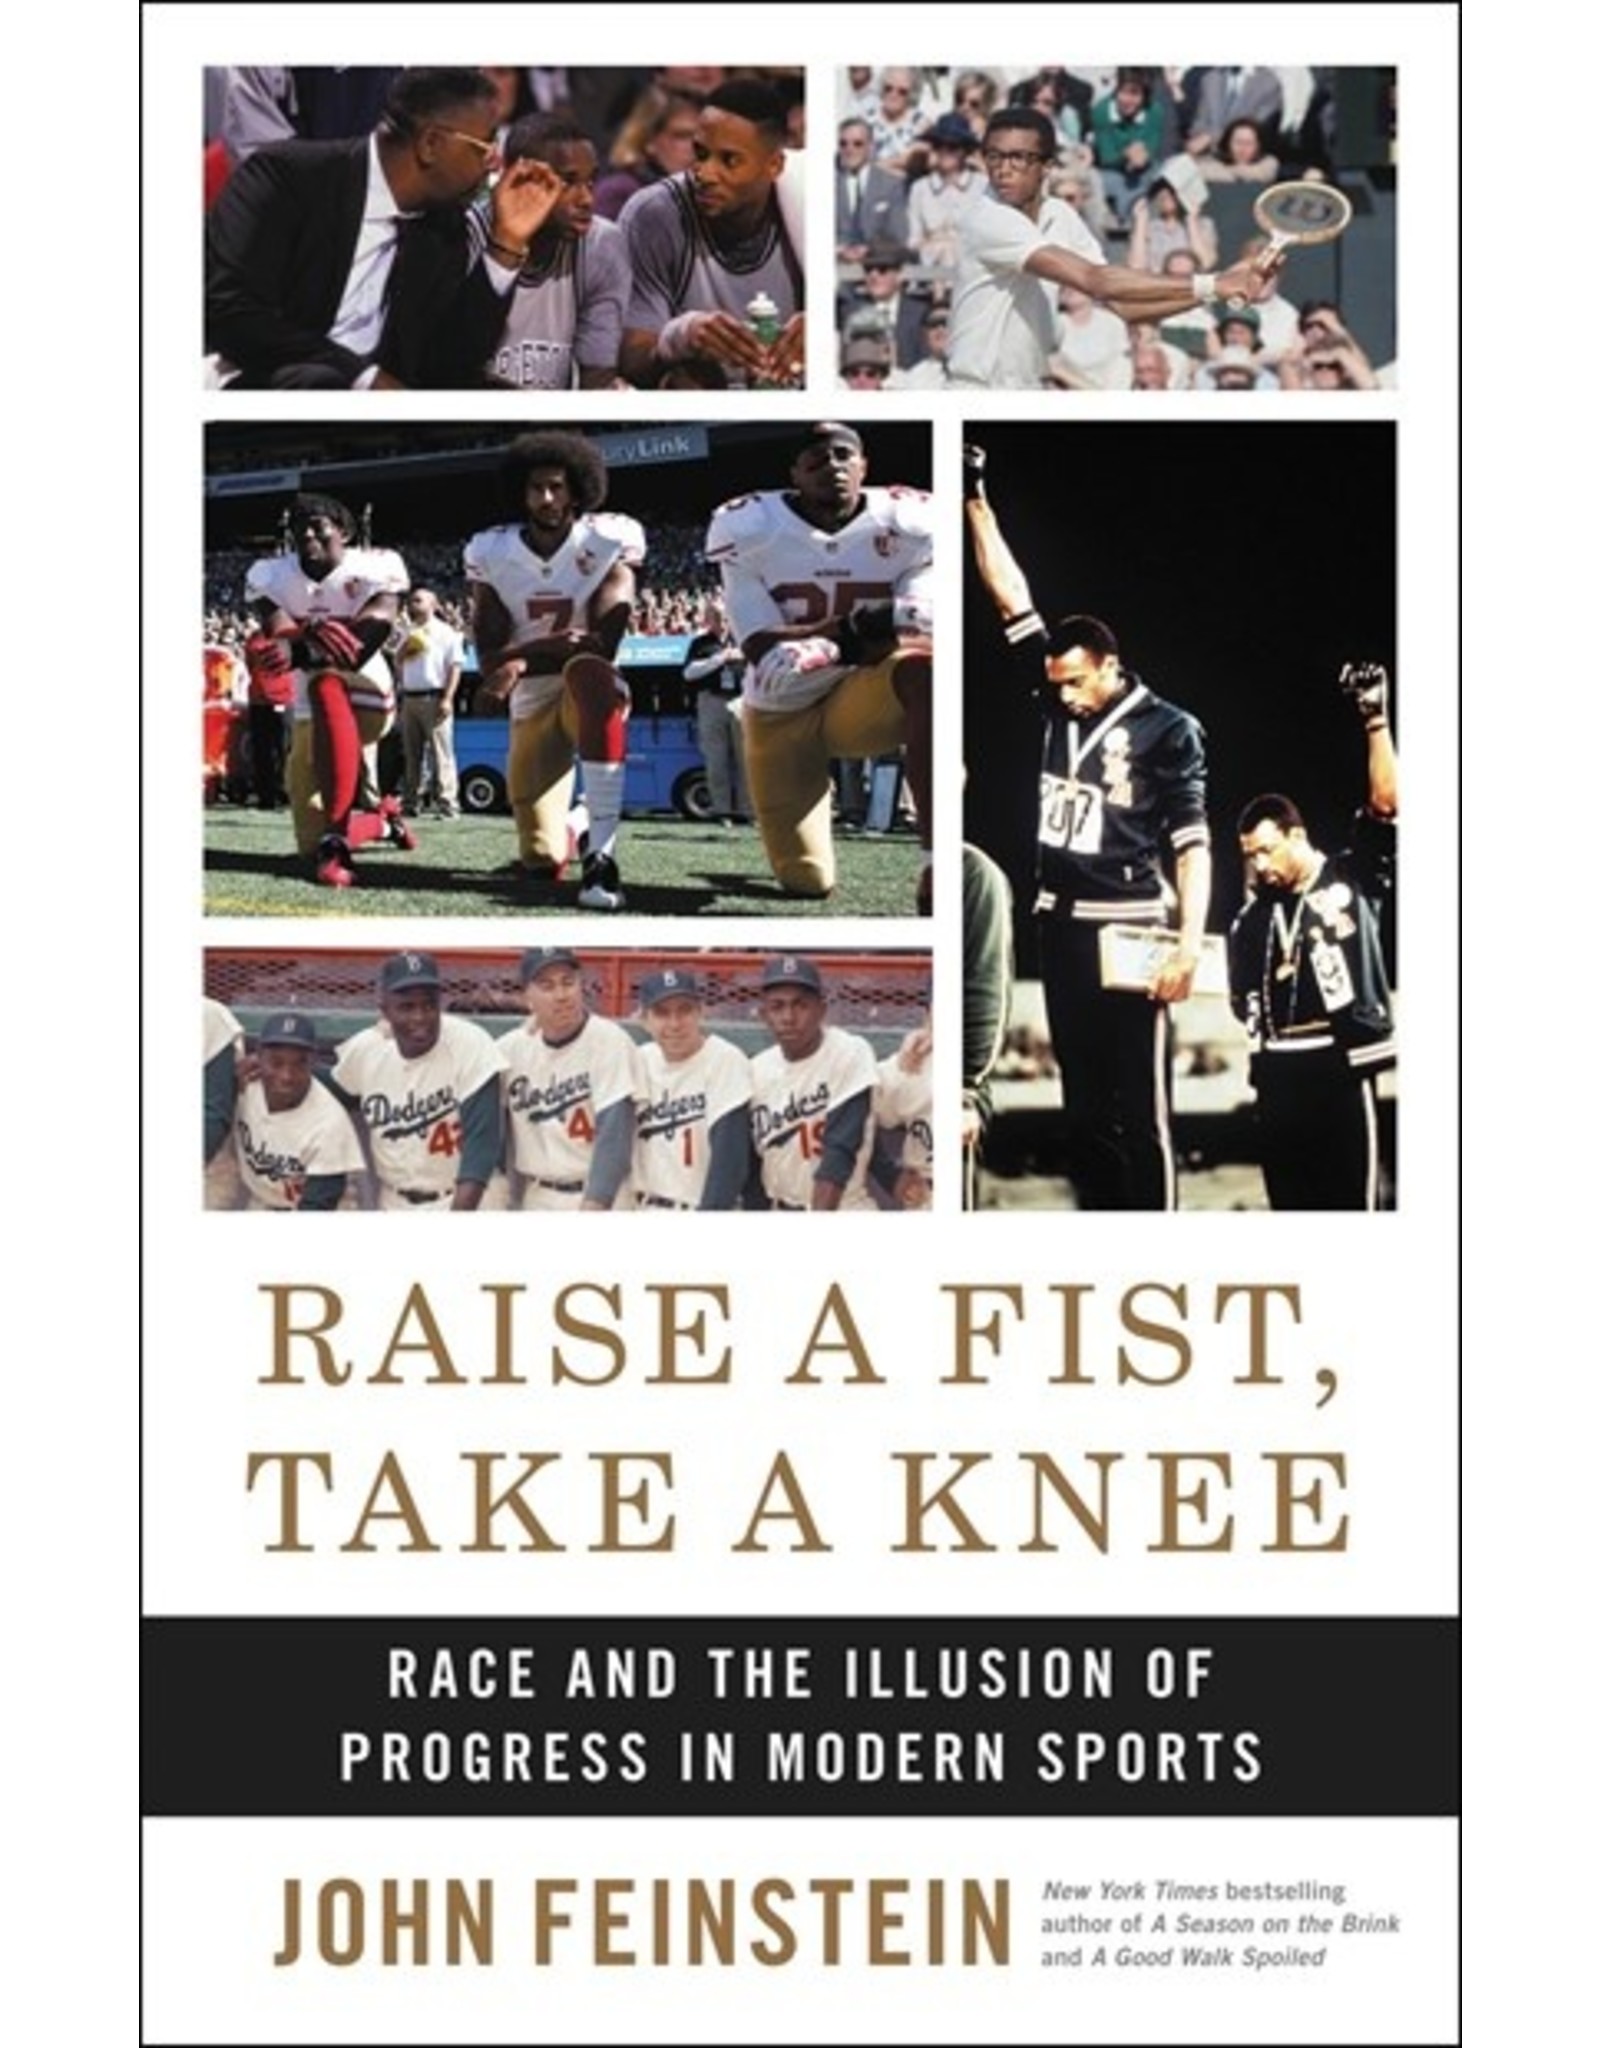 Books Raise A Fist, Take A Knee : Race and the Illusion of Progress  in Modern Sports by John Feinstein